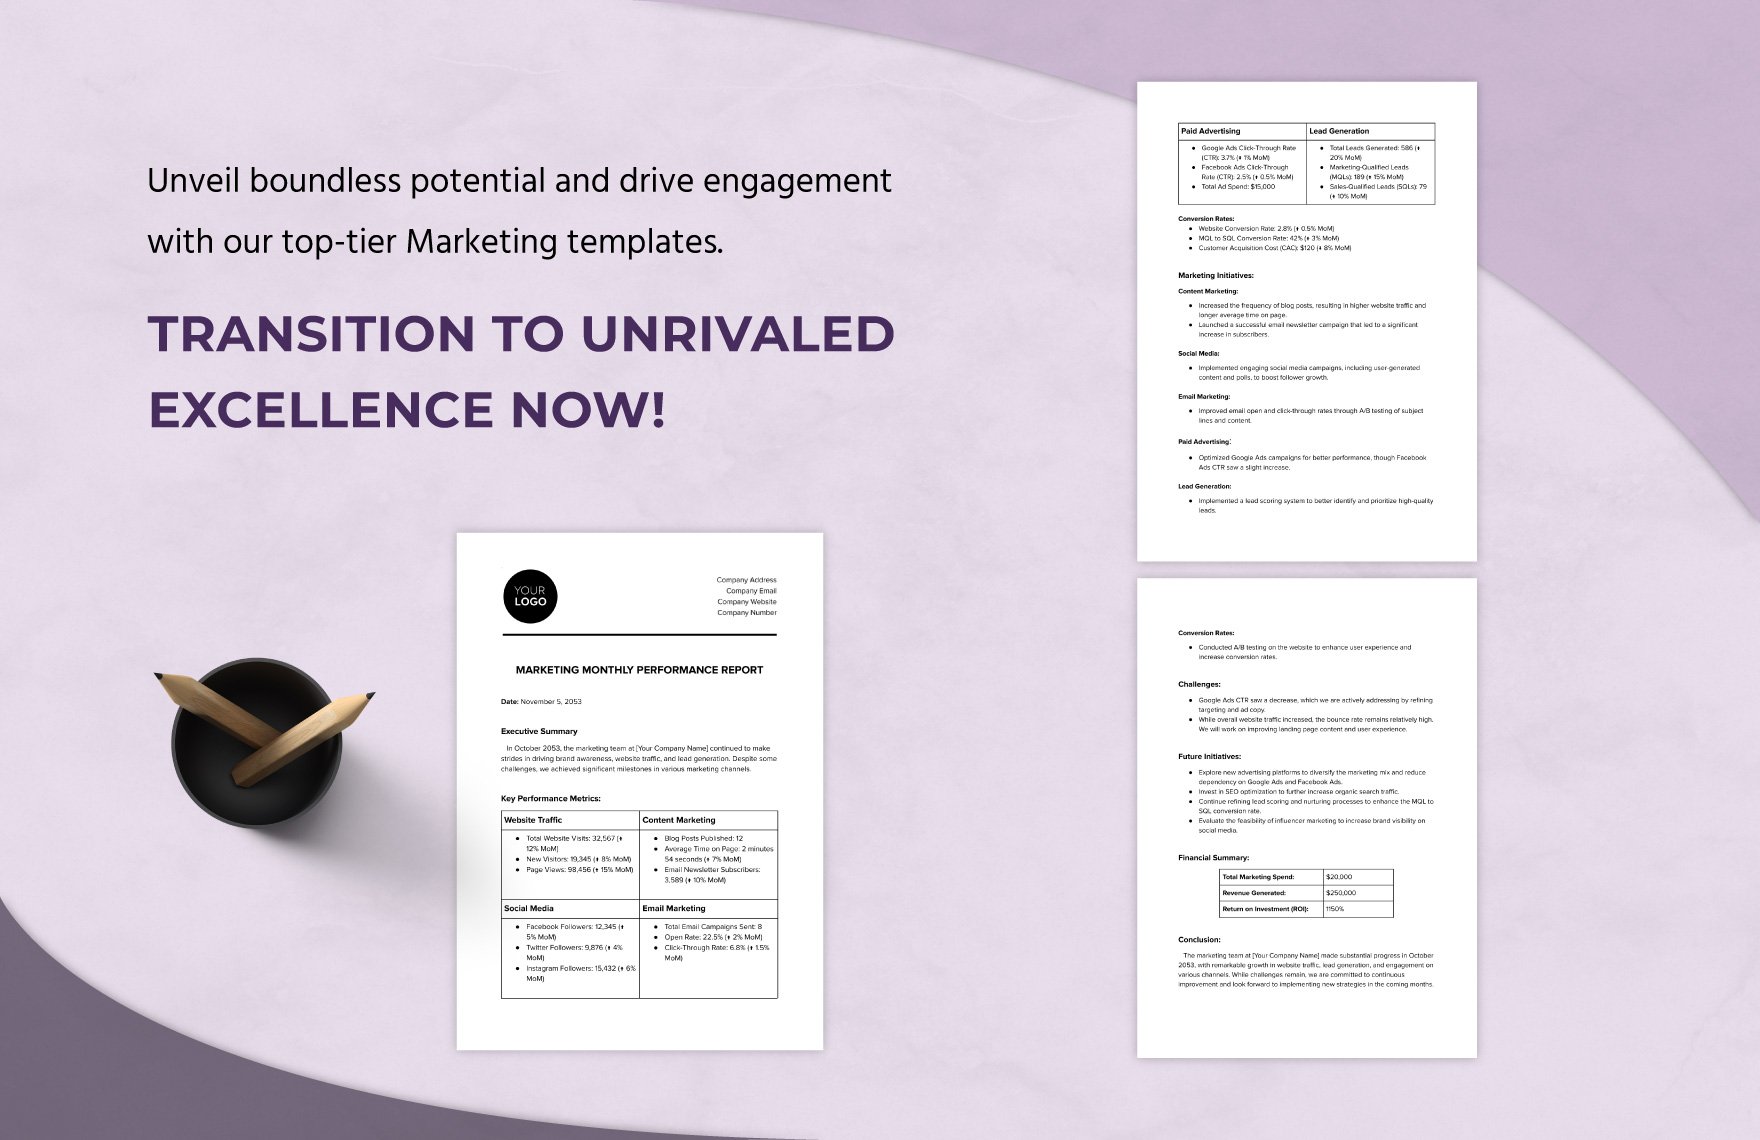 Marketing Monthly Performance Report Template